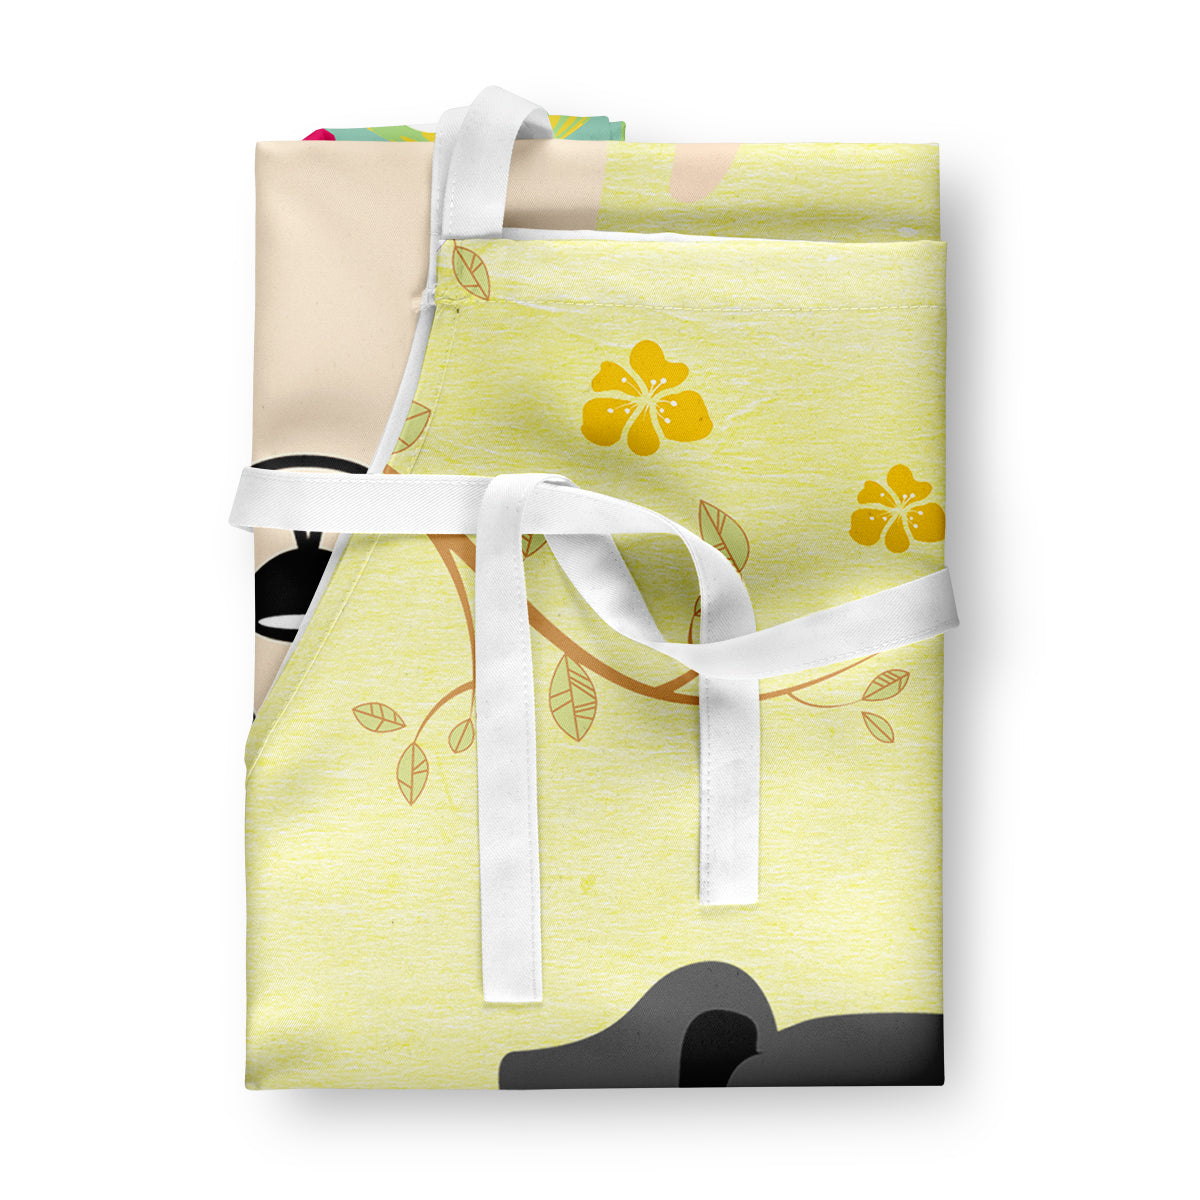 Easter Eggs Smooth Fox Terrier Apron BB6098APRON